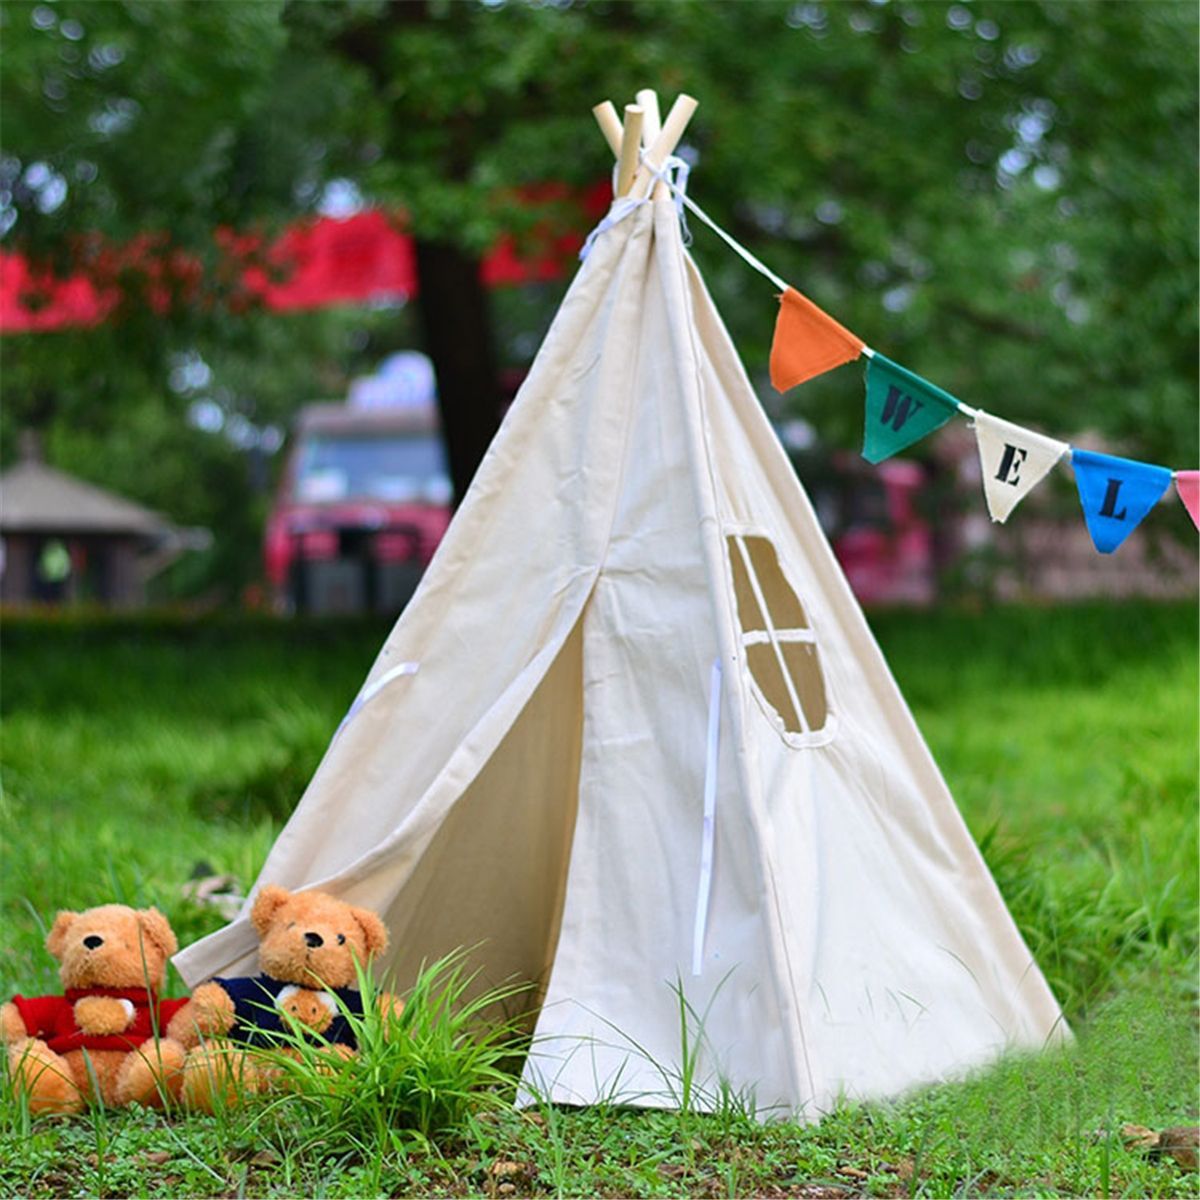 Portable-White-Teepee-Tent-Kids-Playhouse-Children-Sleeping-Dome-Photograph-Backdrop-51quot-1400540